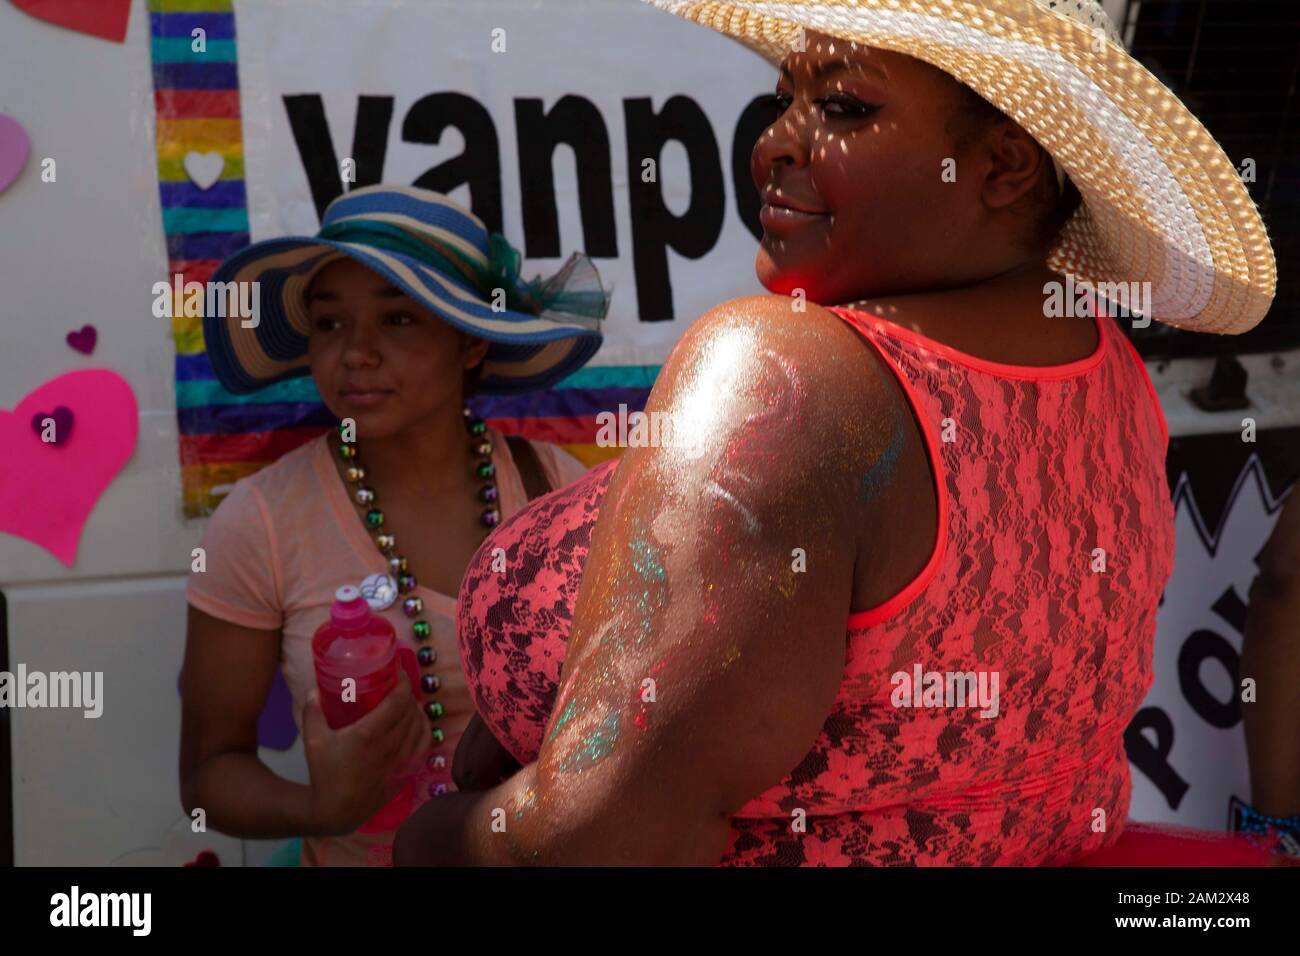 Friends at Pride parade posing in sun hats and lace tank top, Vancouver Pride Festival 2014, Vancouver, Canada Stock Photo